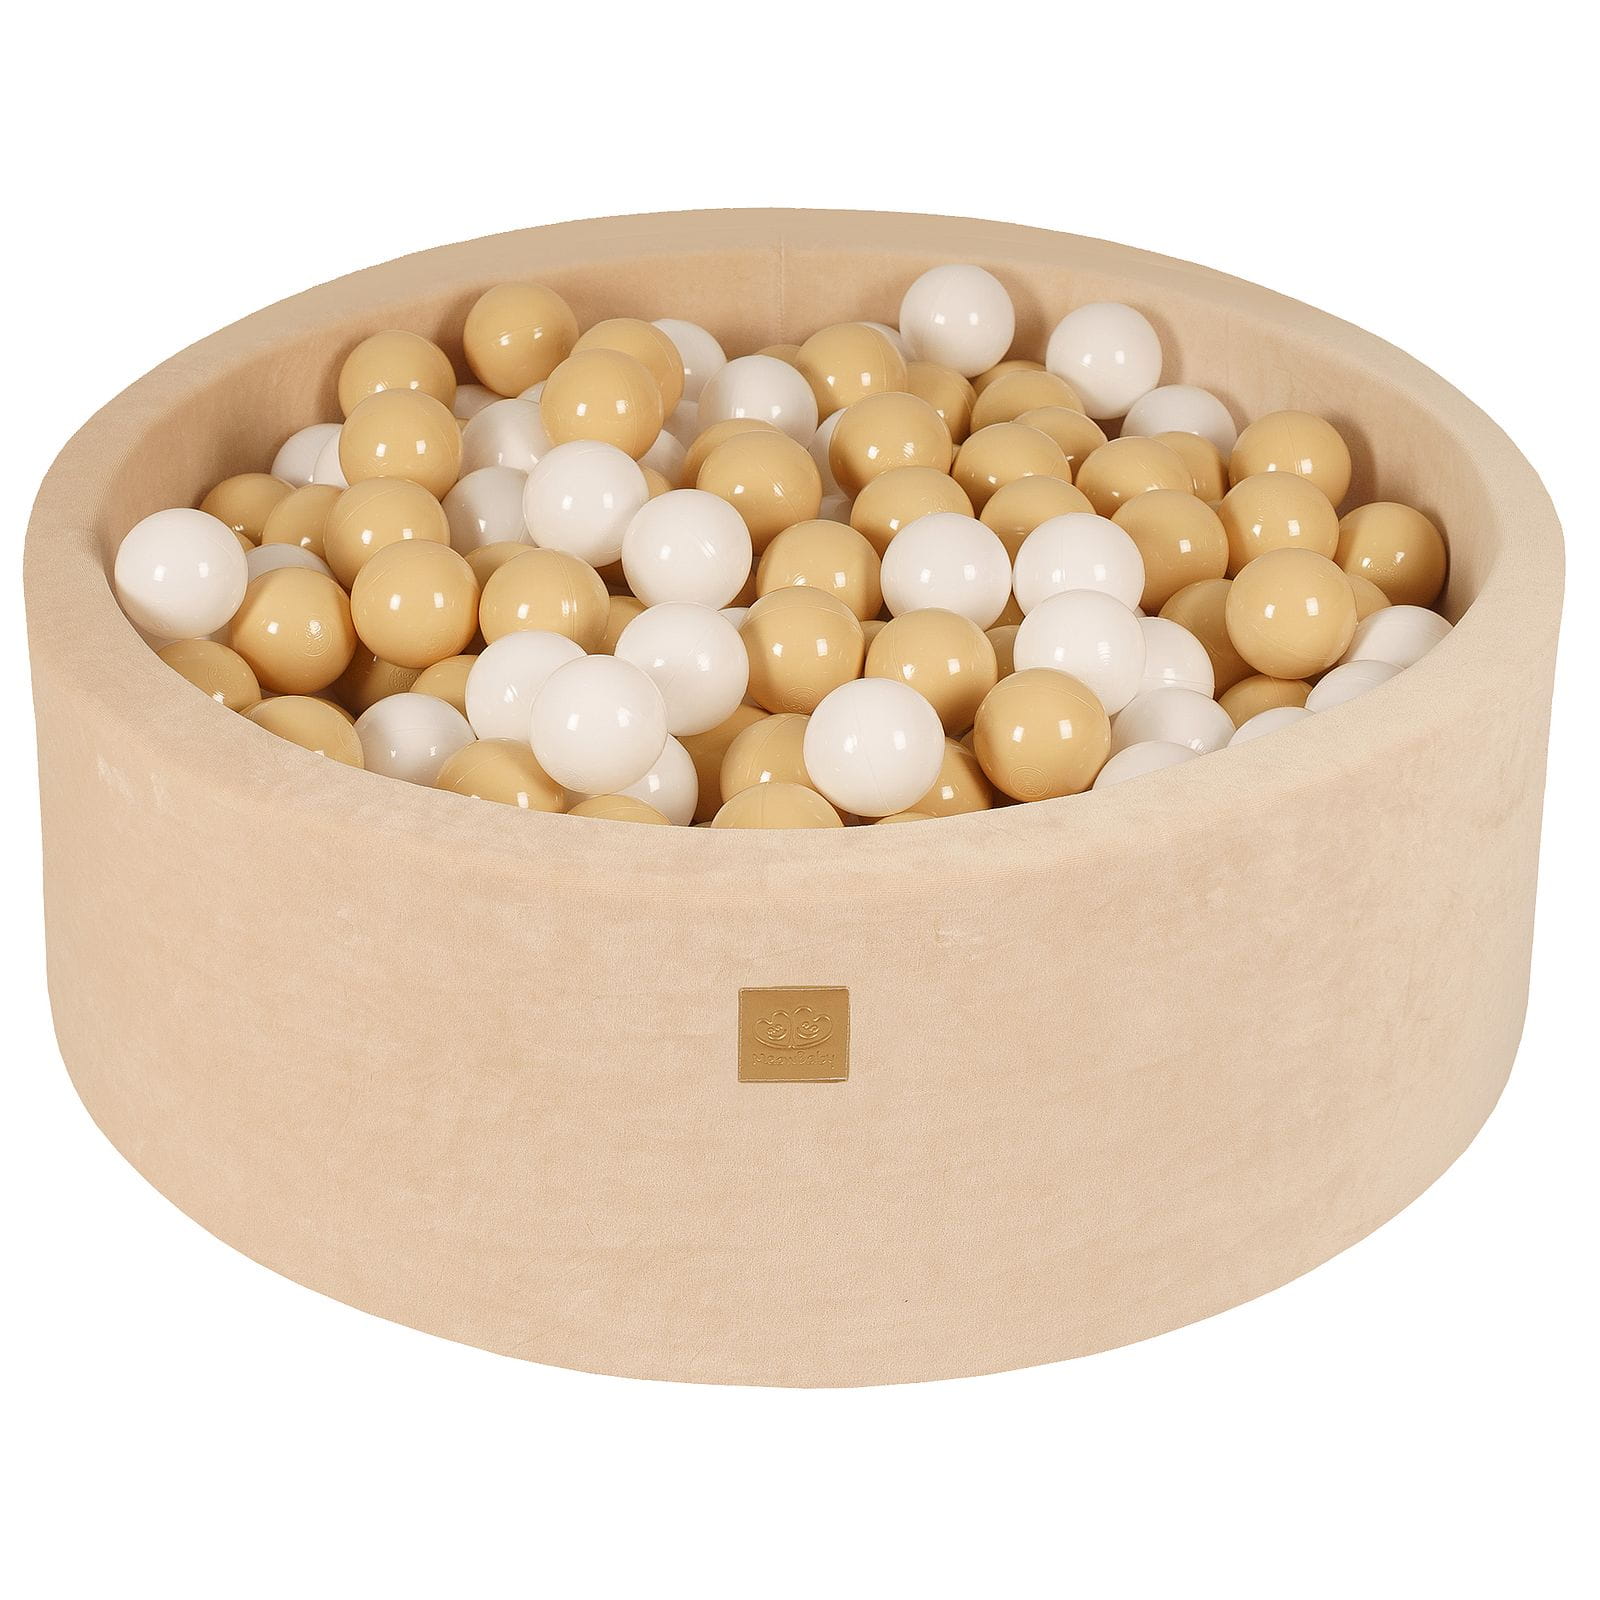 MEOW BABY Ball Pit with 200 Balls 2.75in Included for Toddlers - Baby Soft Foam Round Playpen, Velvet, Ecru: White/Beige